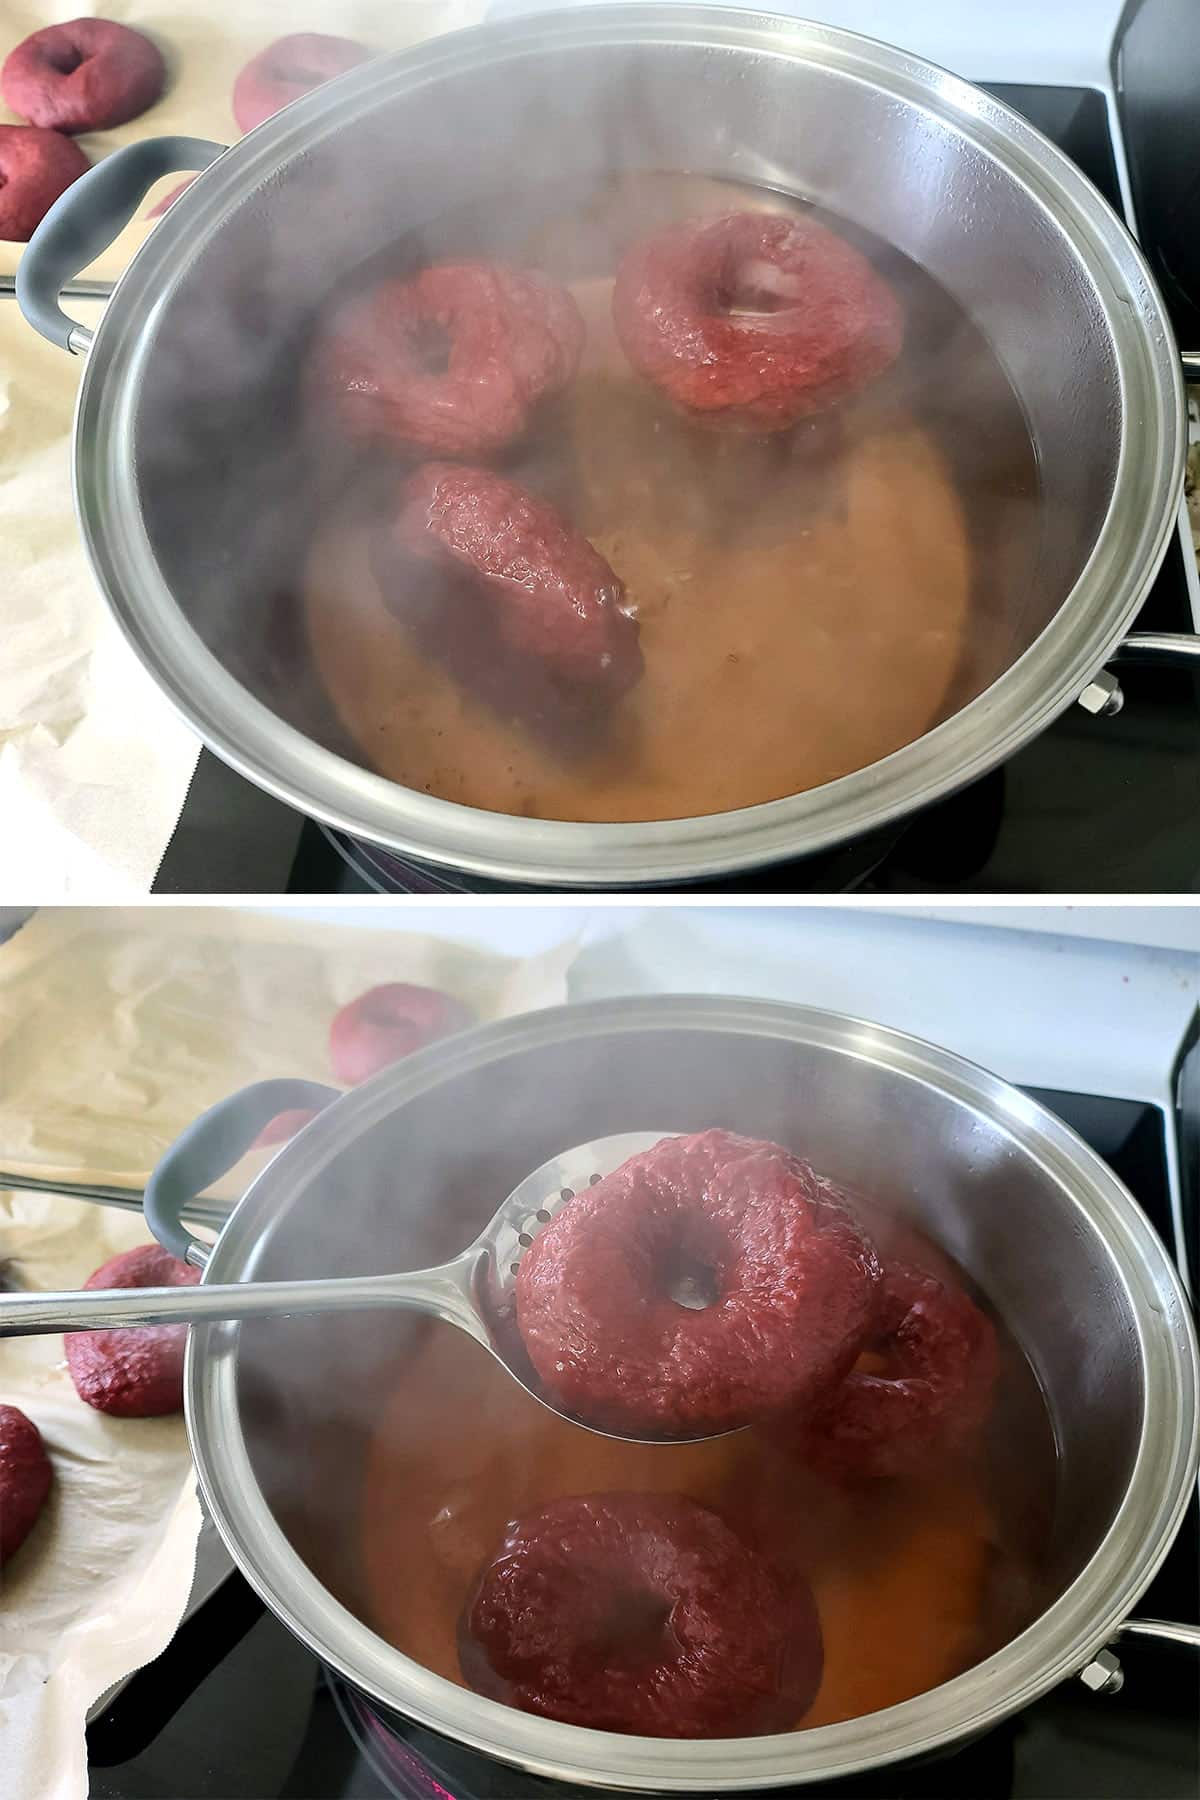 A 2 part image showing 3 red velvet bagels boiling, then one being removed with a slotted spoon.